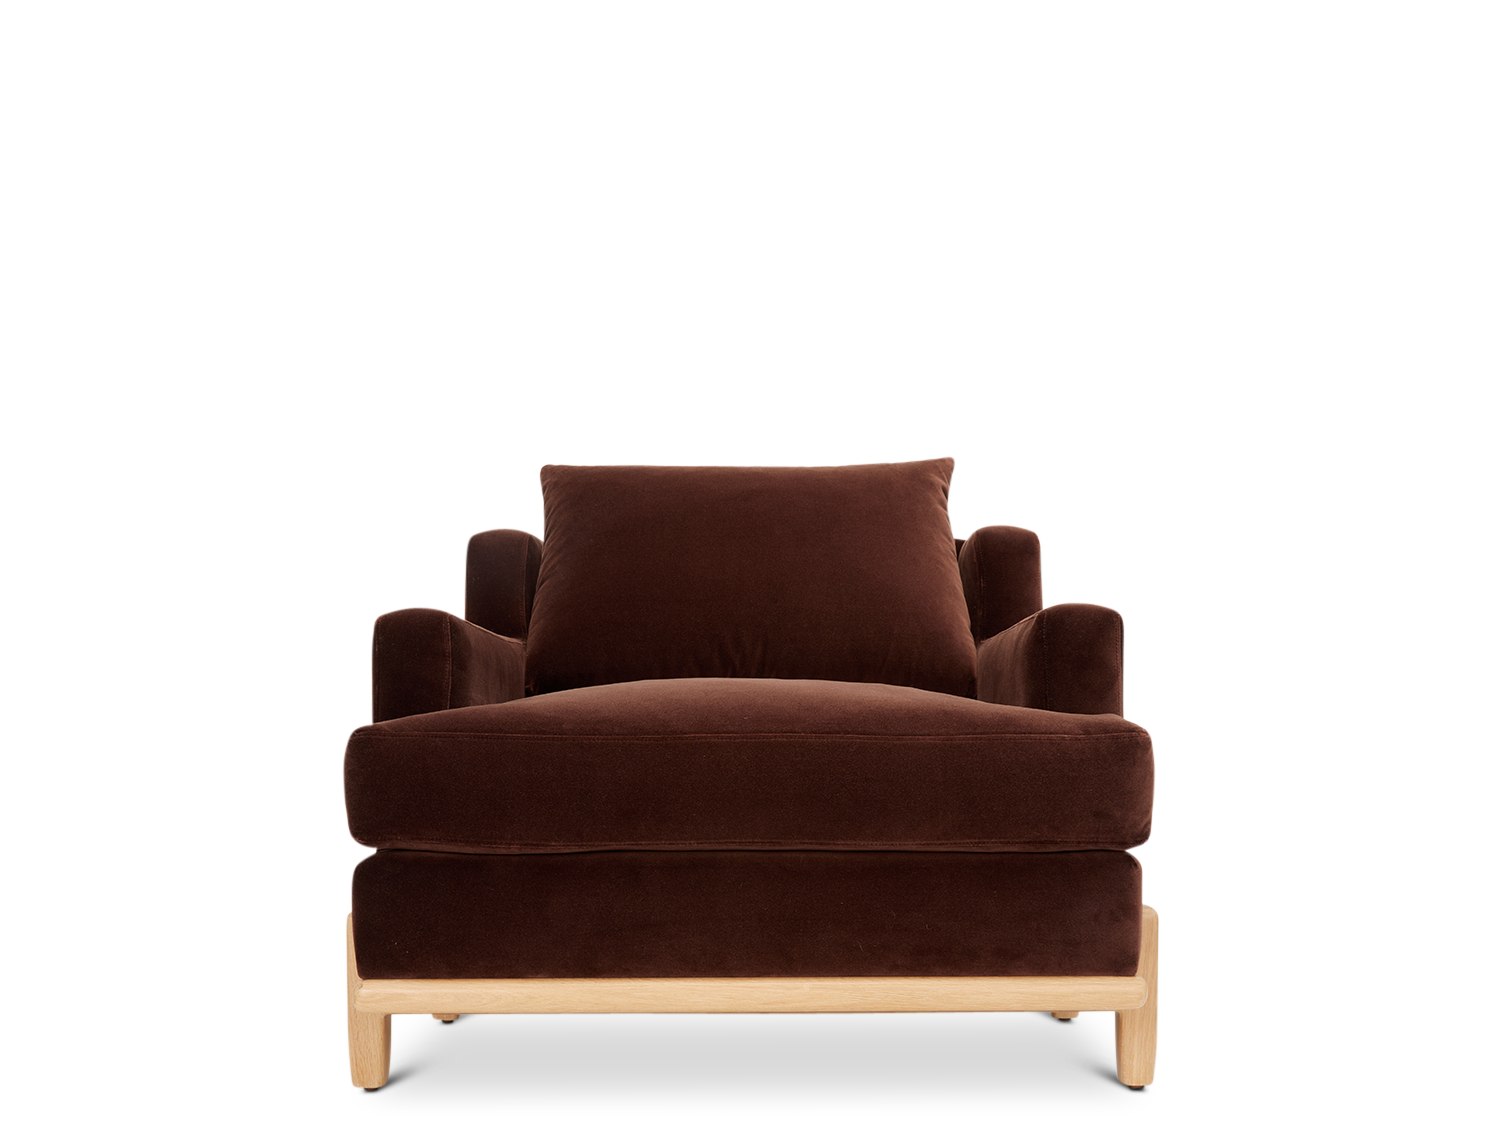 Brian Paquette x LF - George Lounge Chair